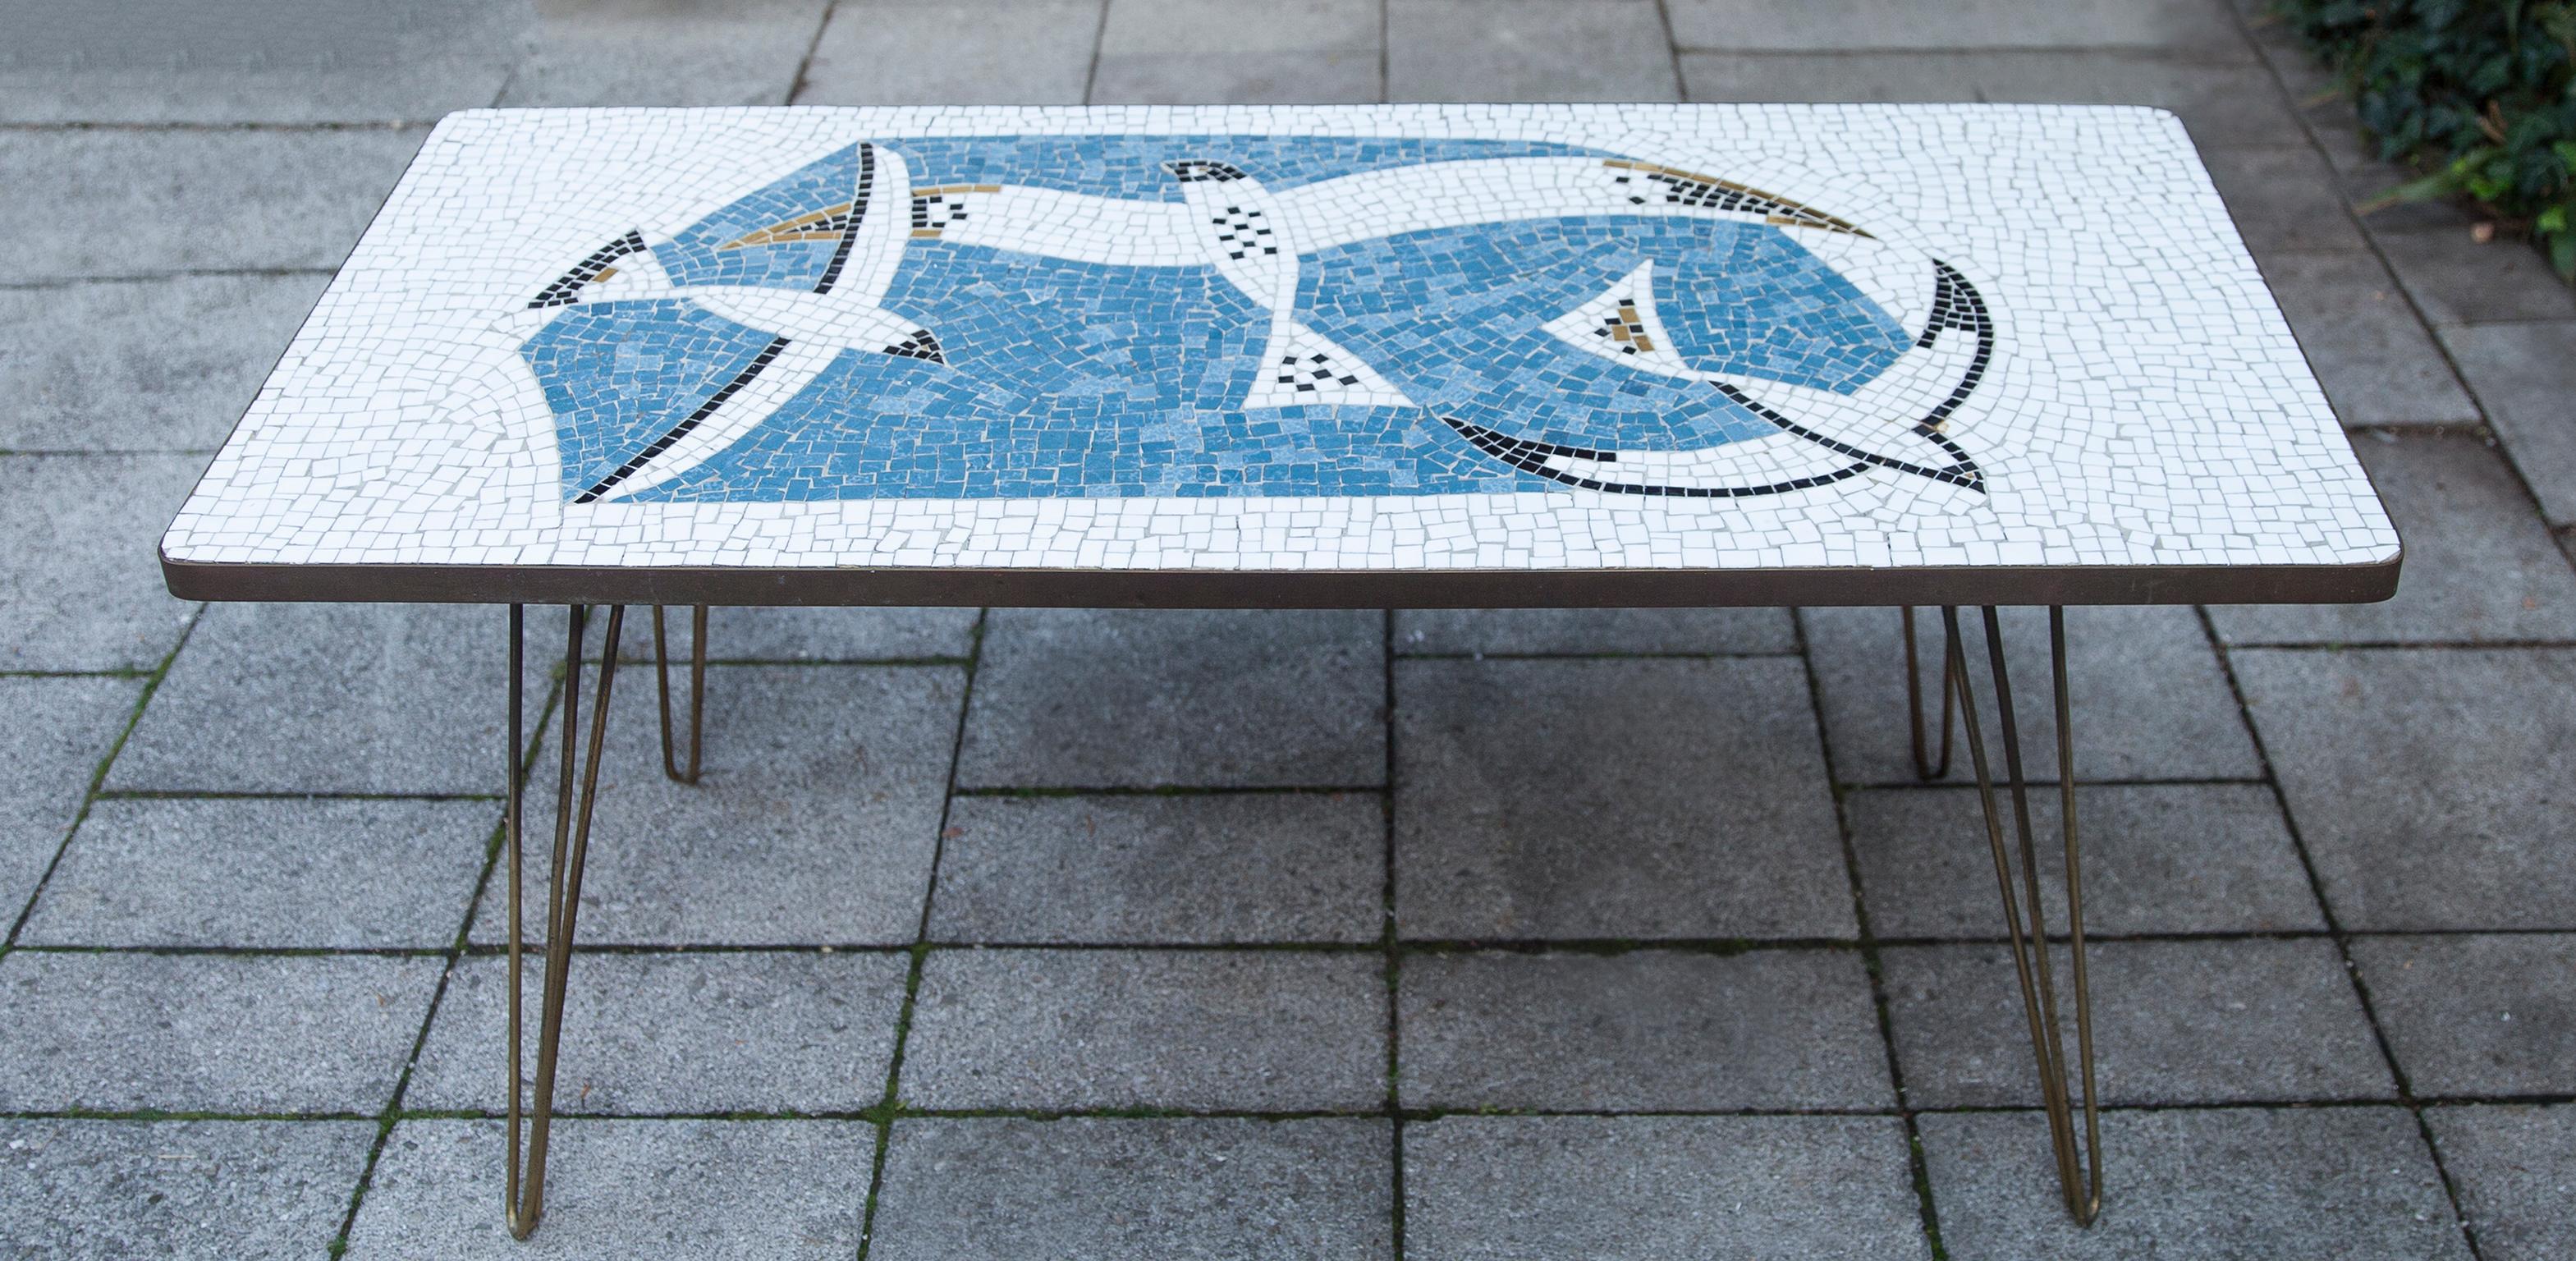 Mosaic coffee table by the German sculptor Berthold Muller, Oerlinghausen (1893-1979). The table have beautiful mosaic pattern of glass mosaic tiles and a brass rim and four brass legs. The colours of the mosaic are blue and white black with three